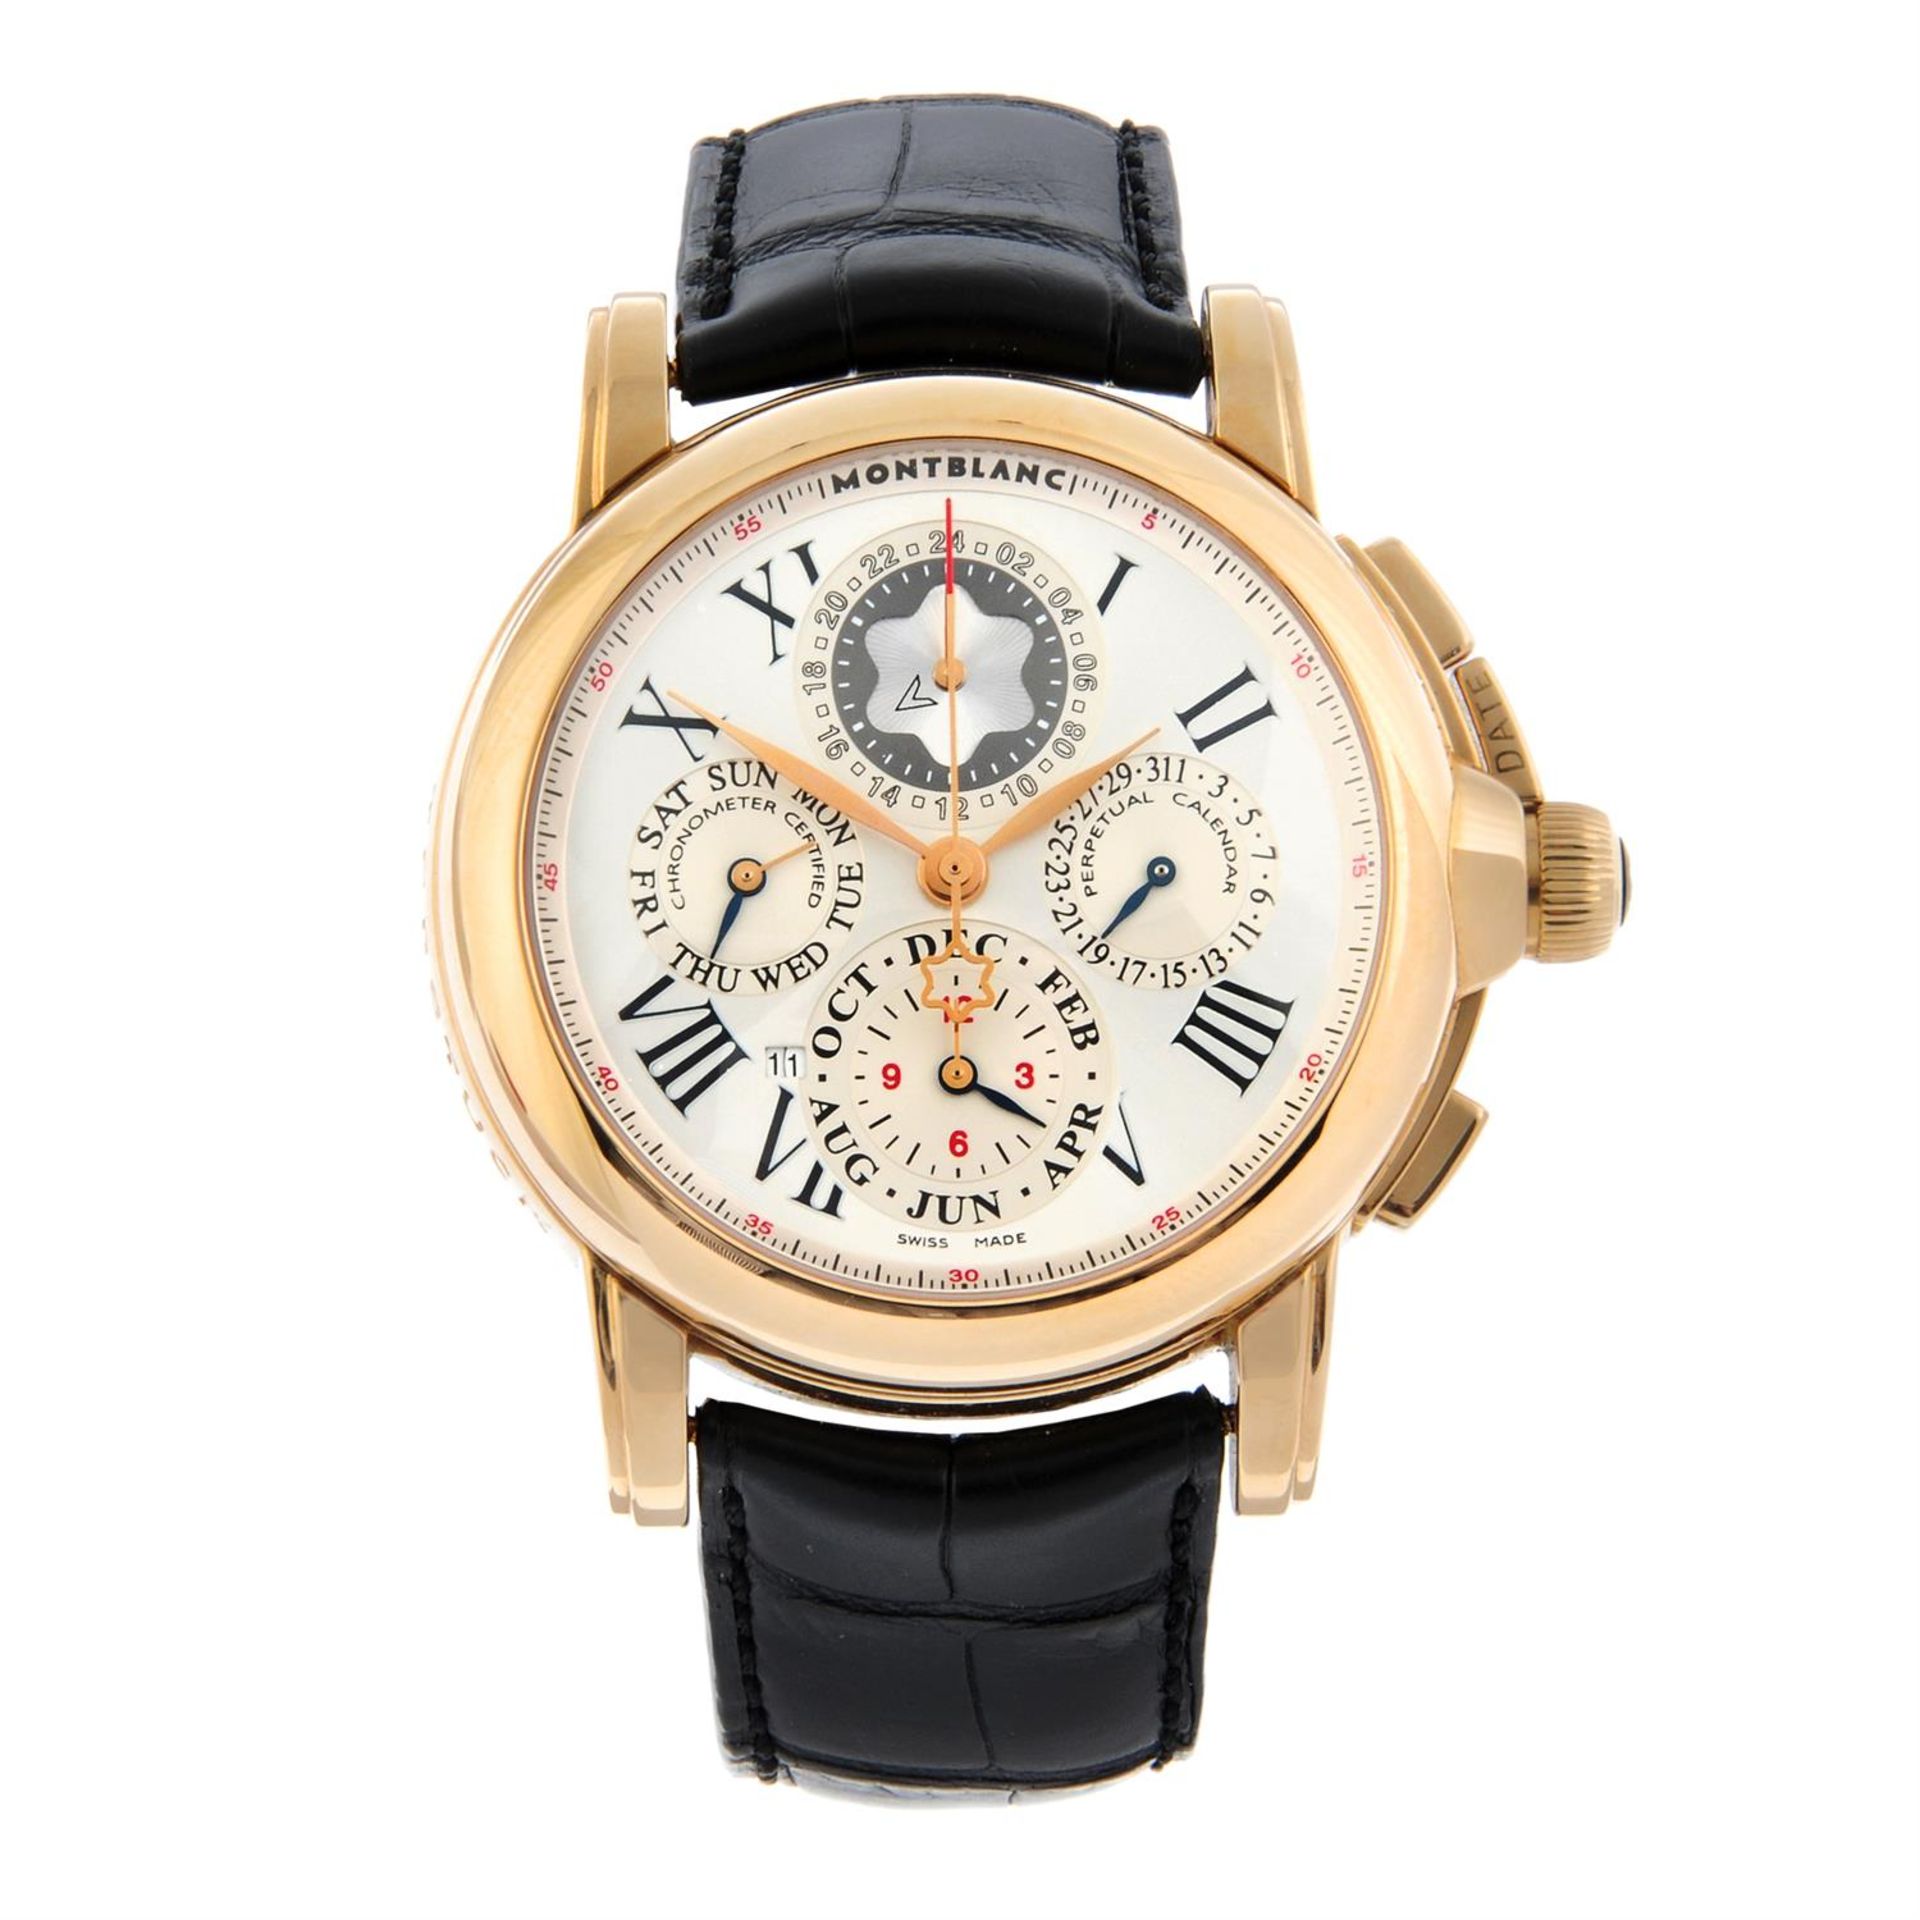 MONTBLANC - a limited edition 100th Anniversary 18ct rose gold Star Chronograph GMT 1906 wrist